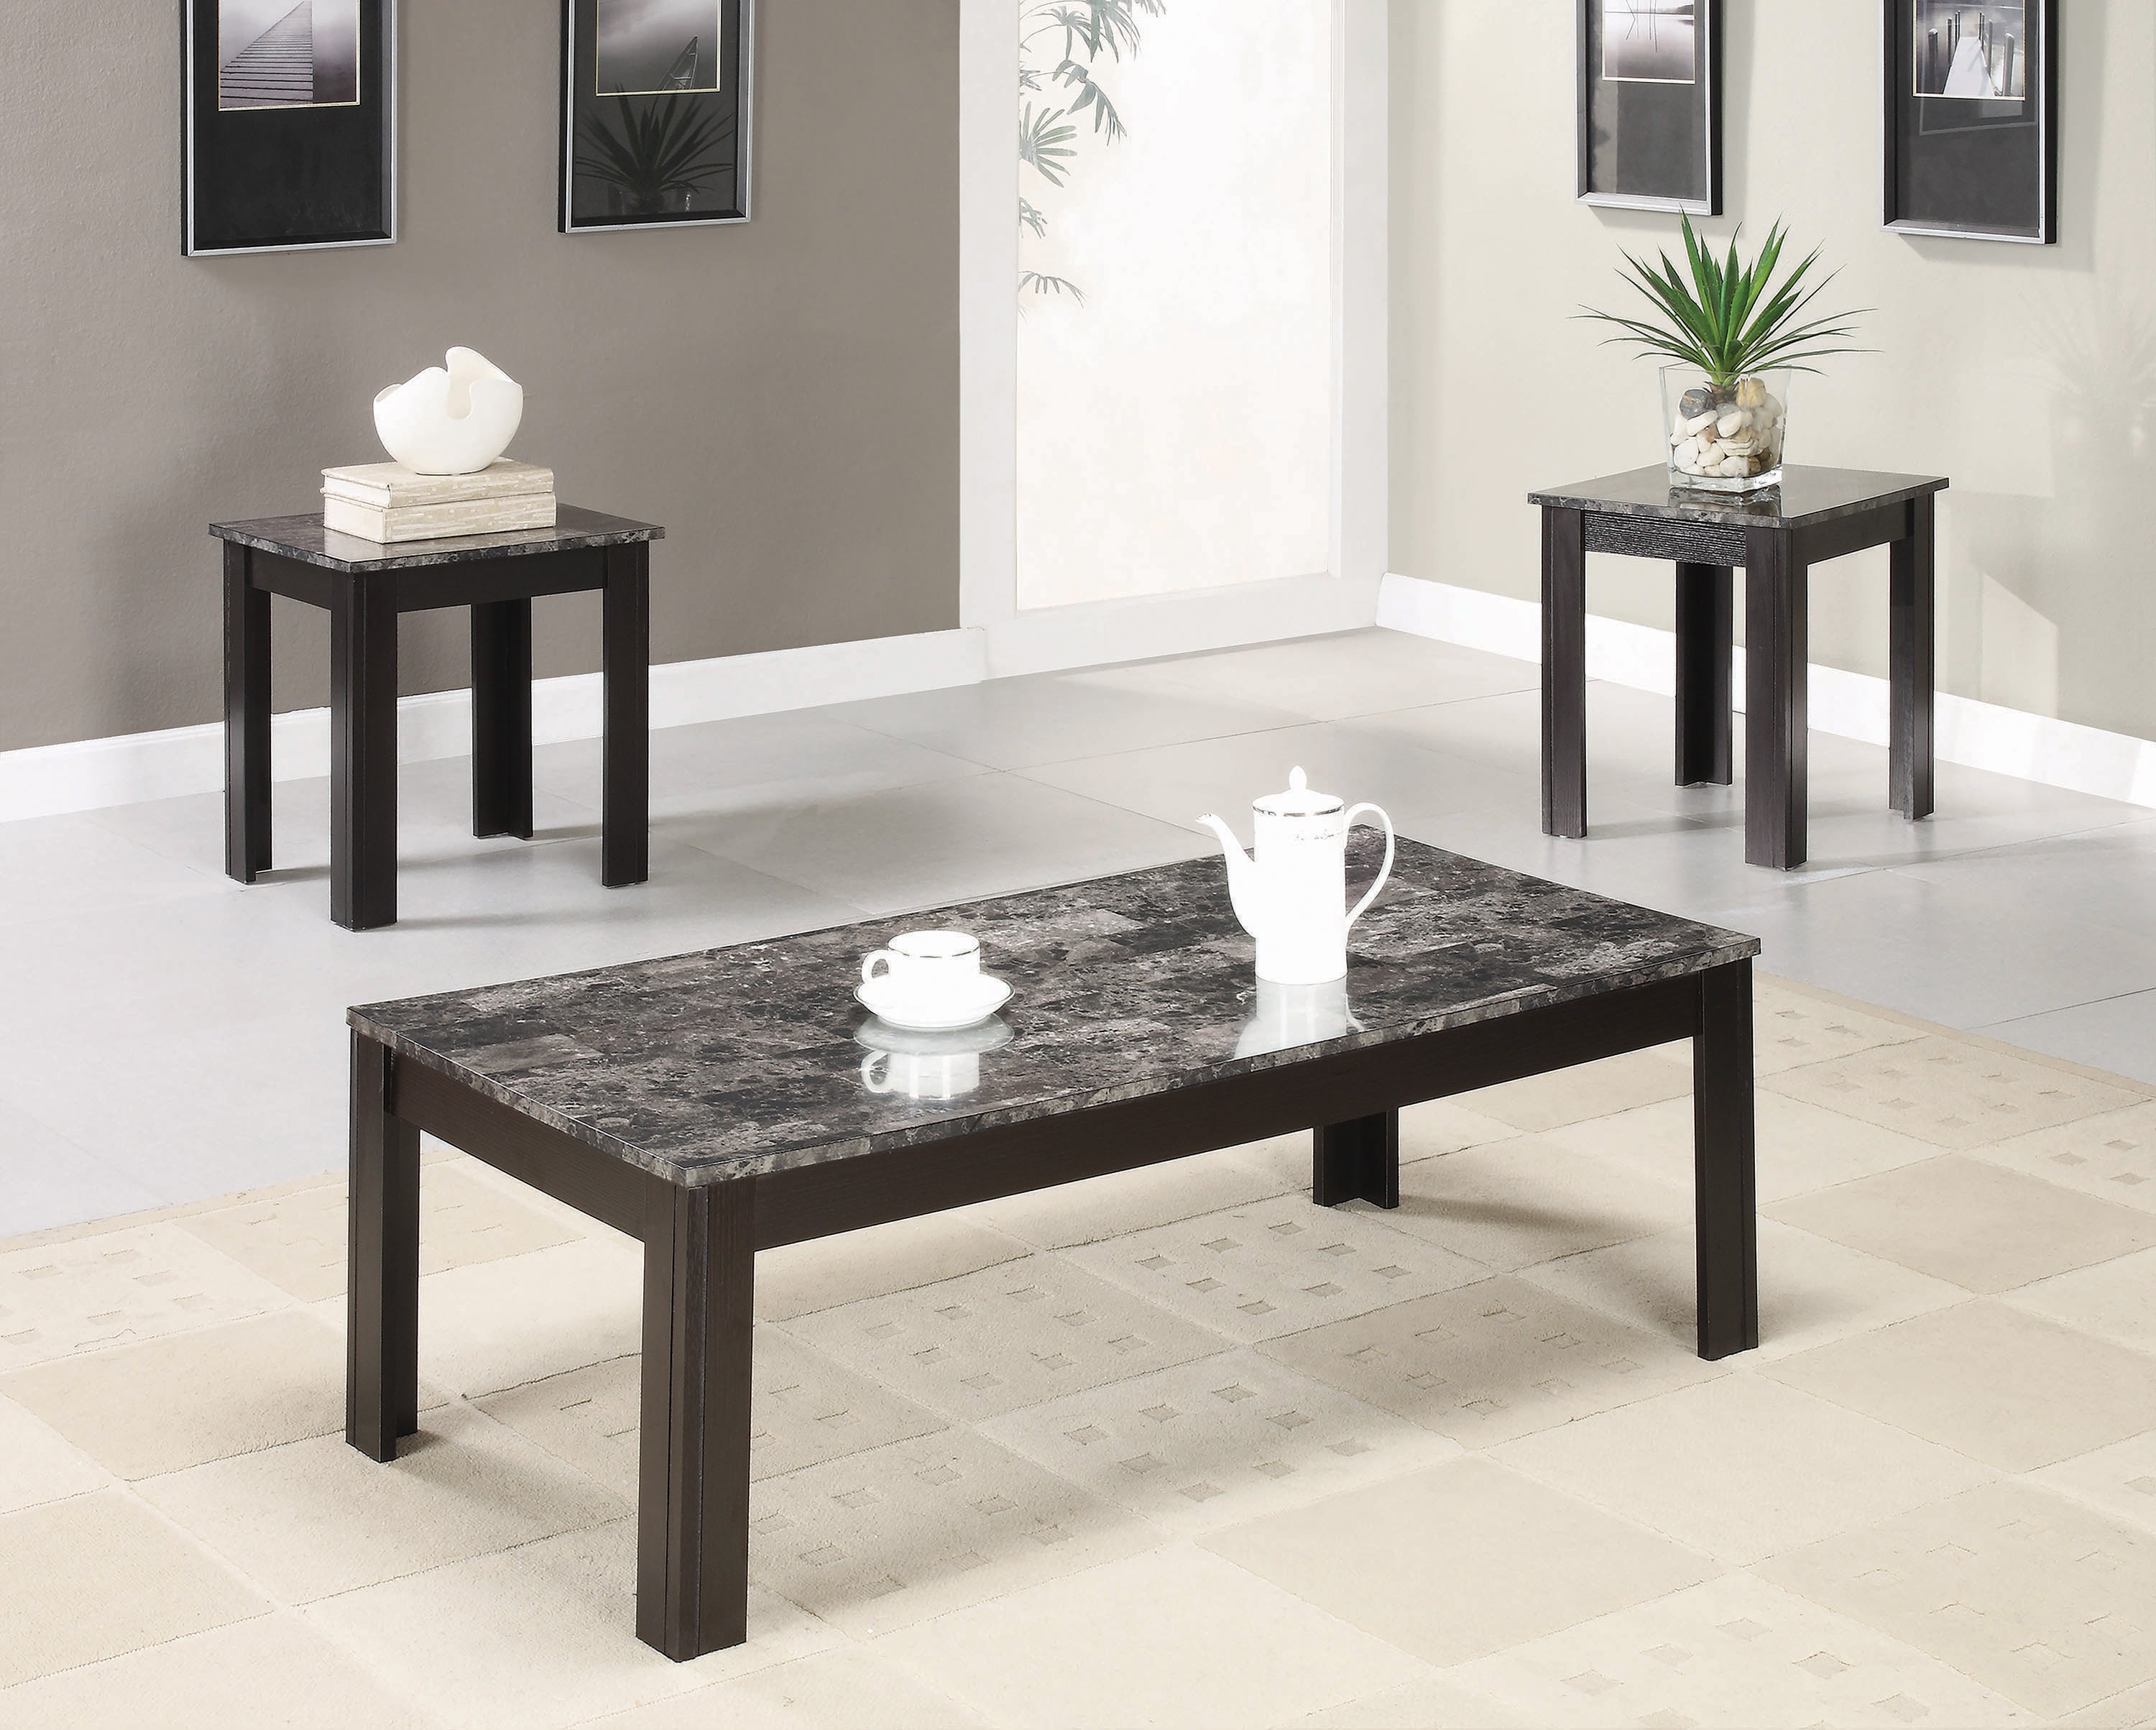 3-Piece Faux-Marble Top Occasional Table Set in Black